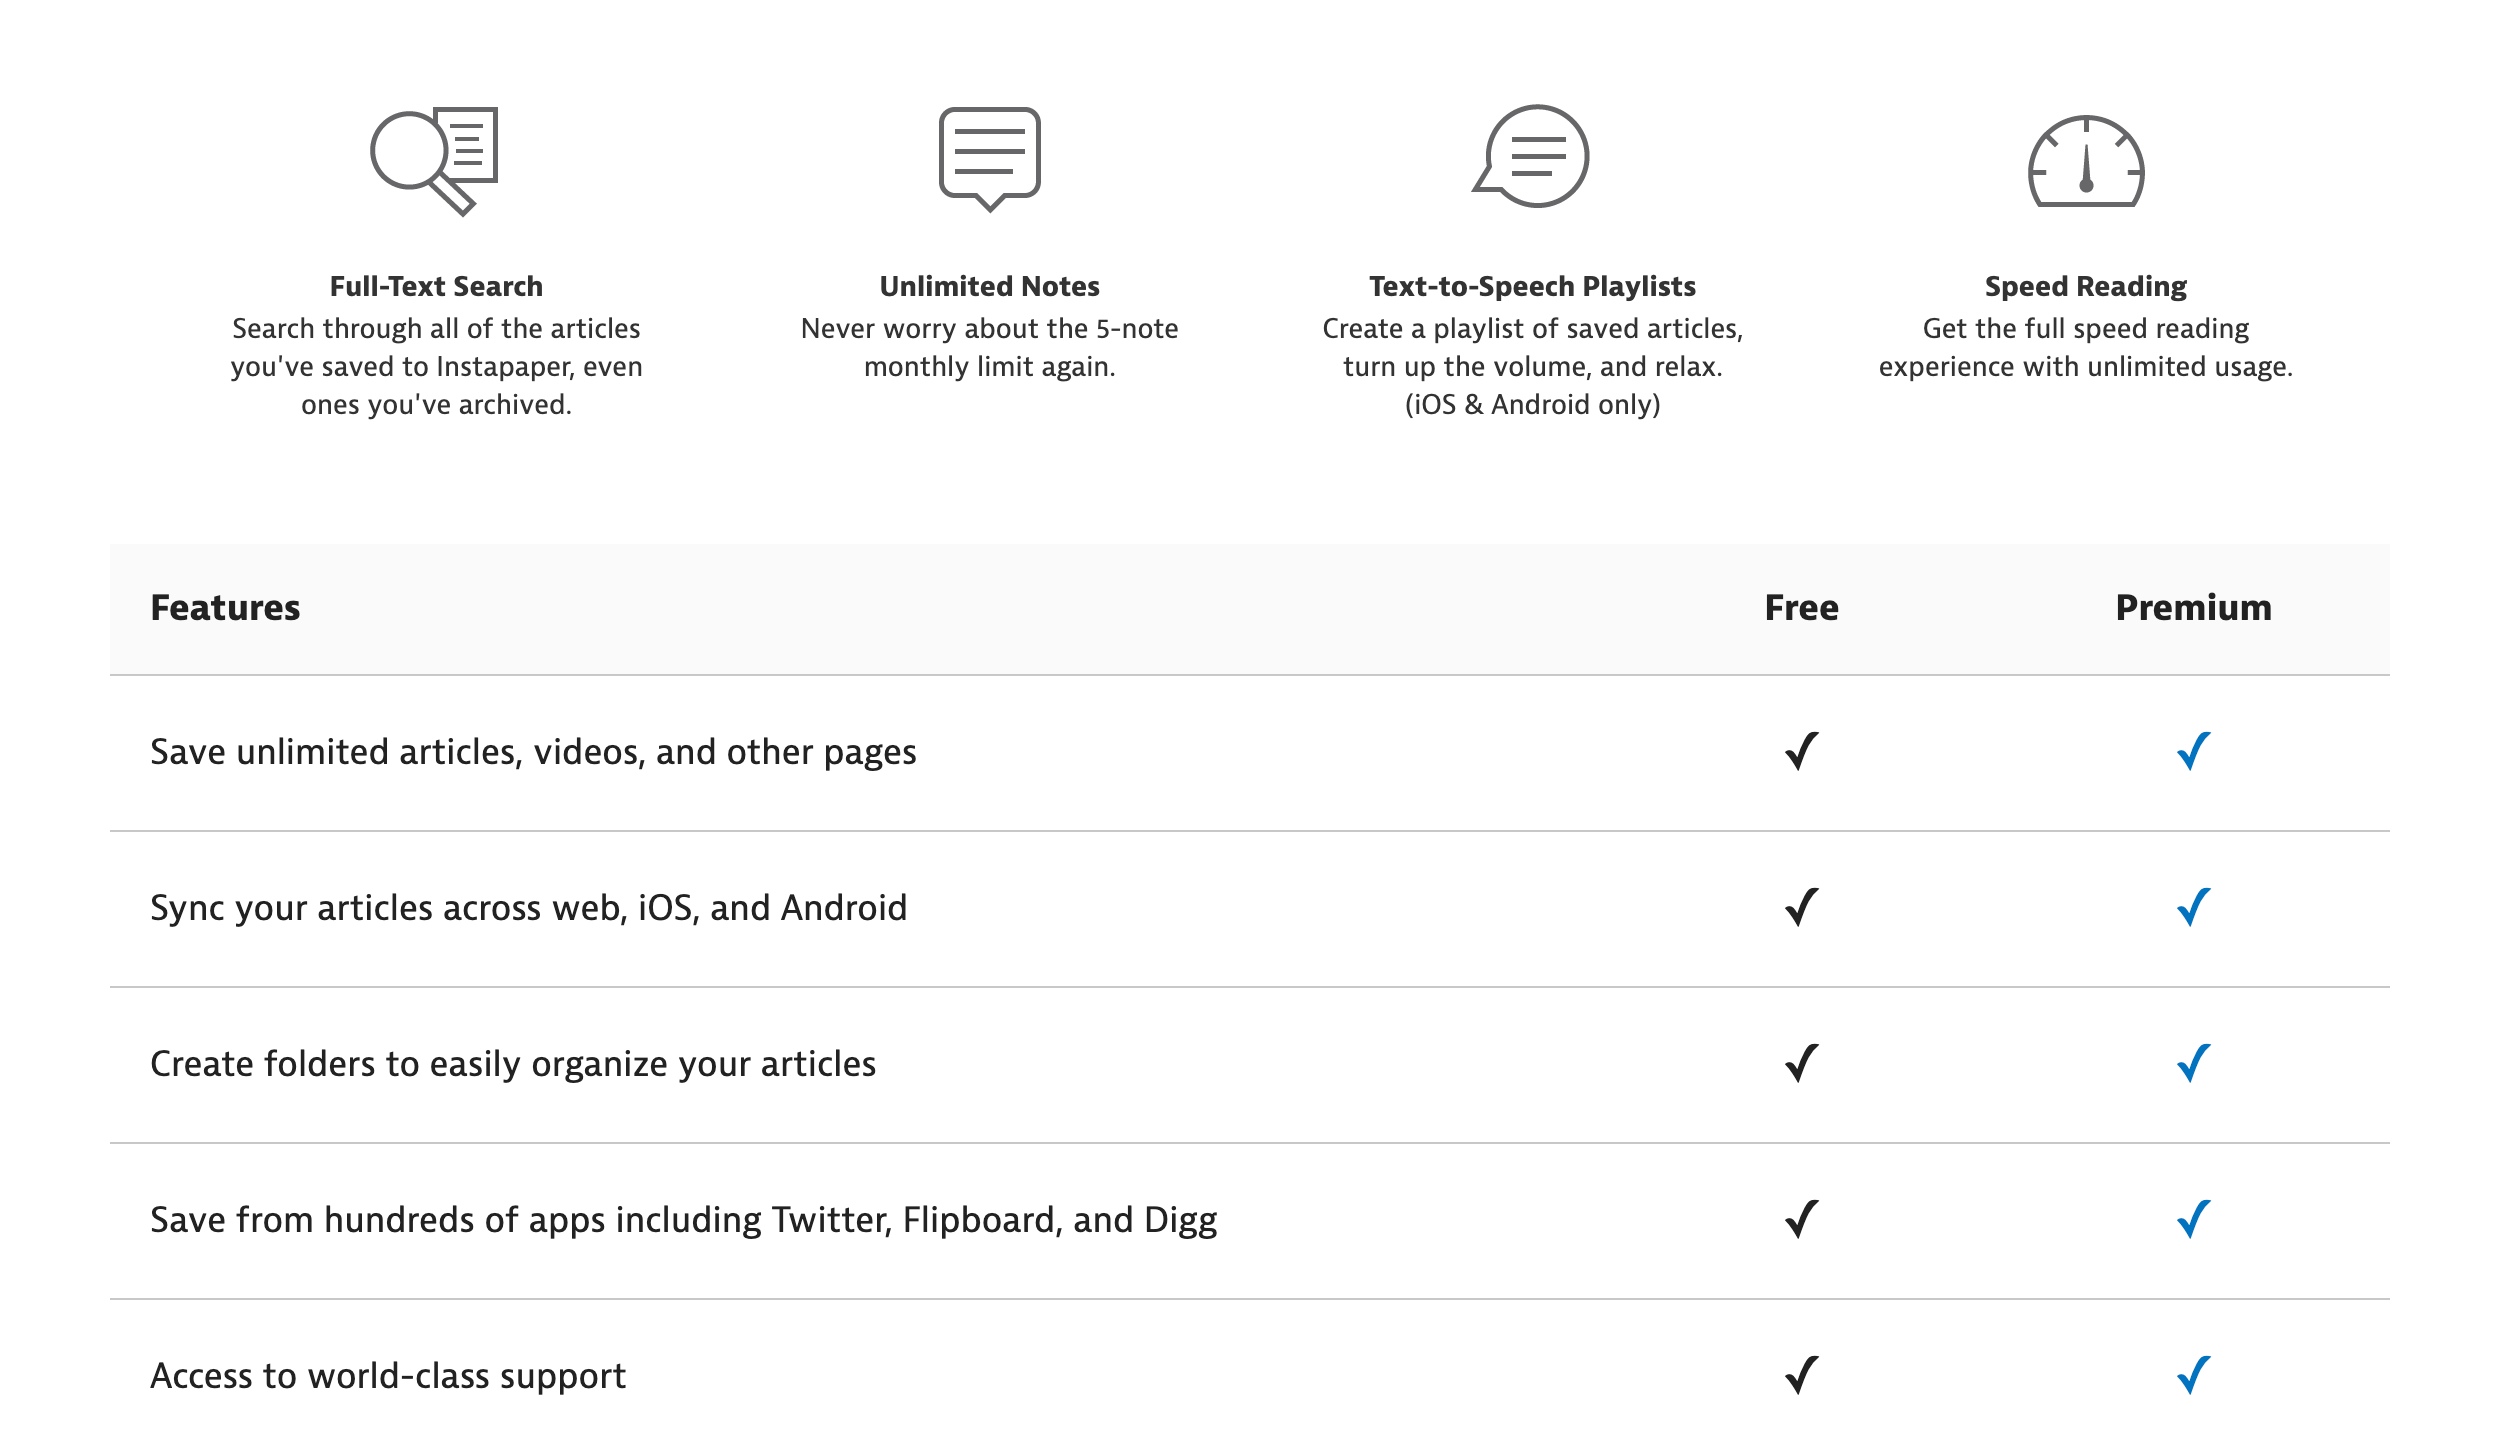 A table comparing the features of Instapaper's free and premium options